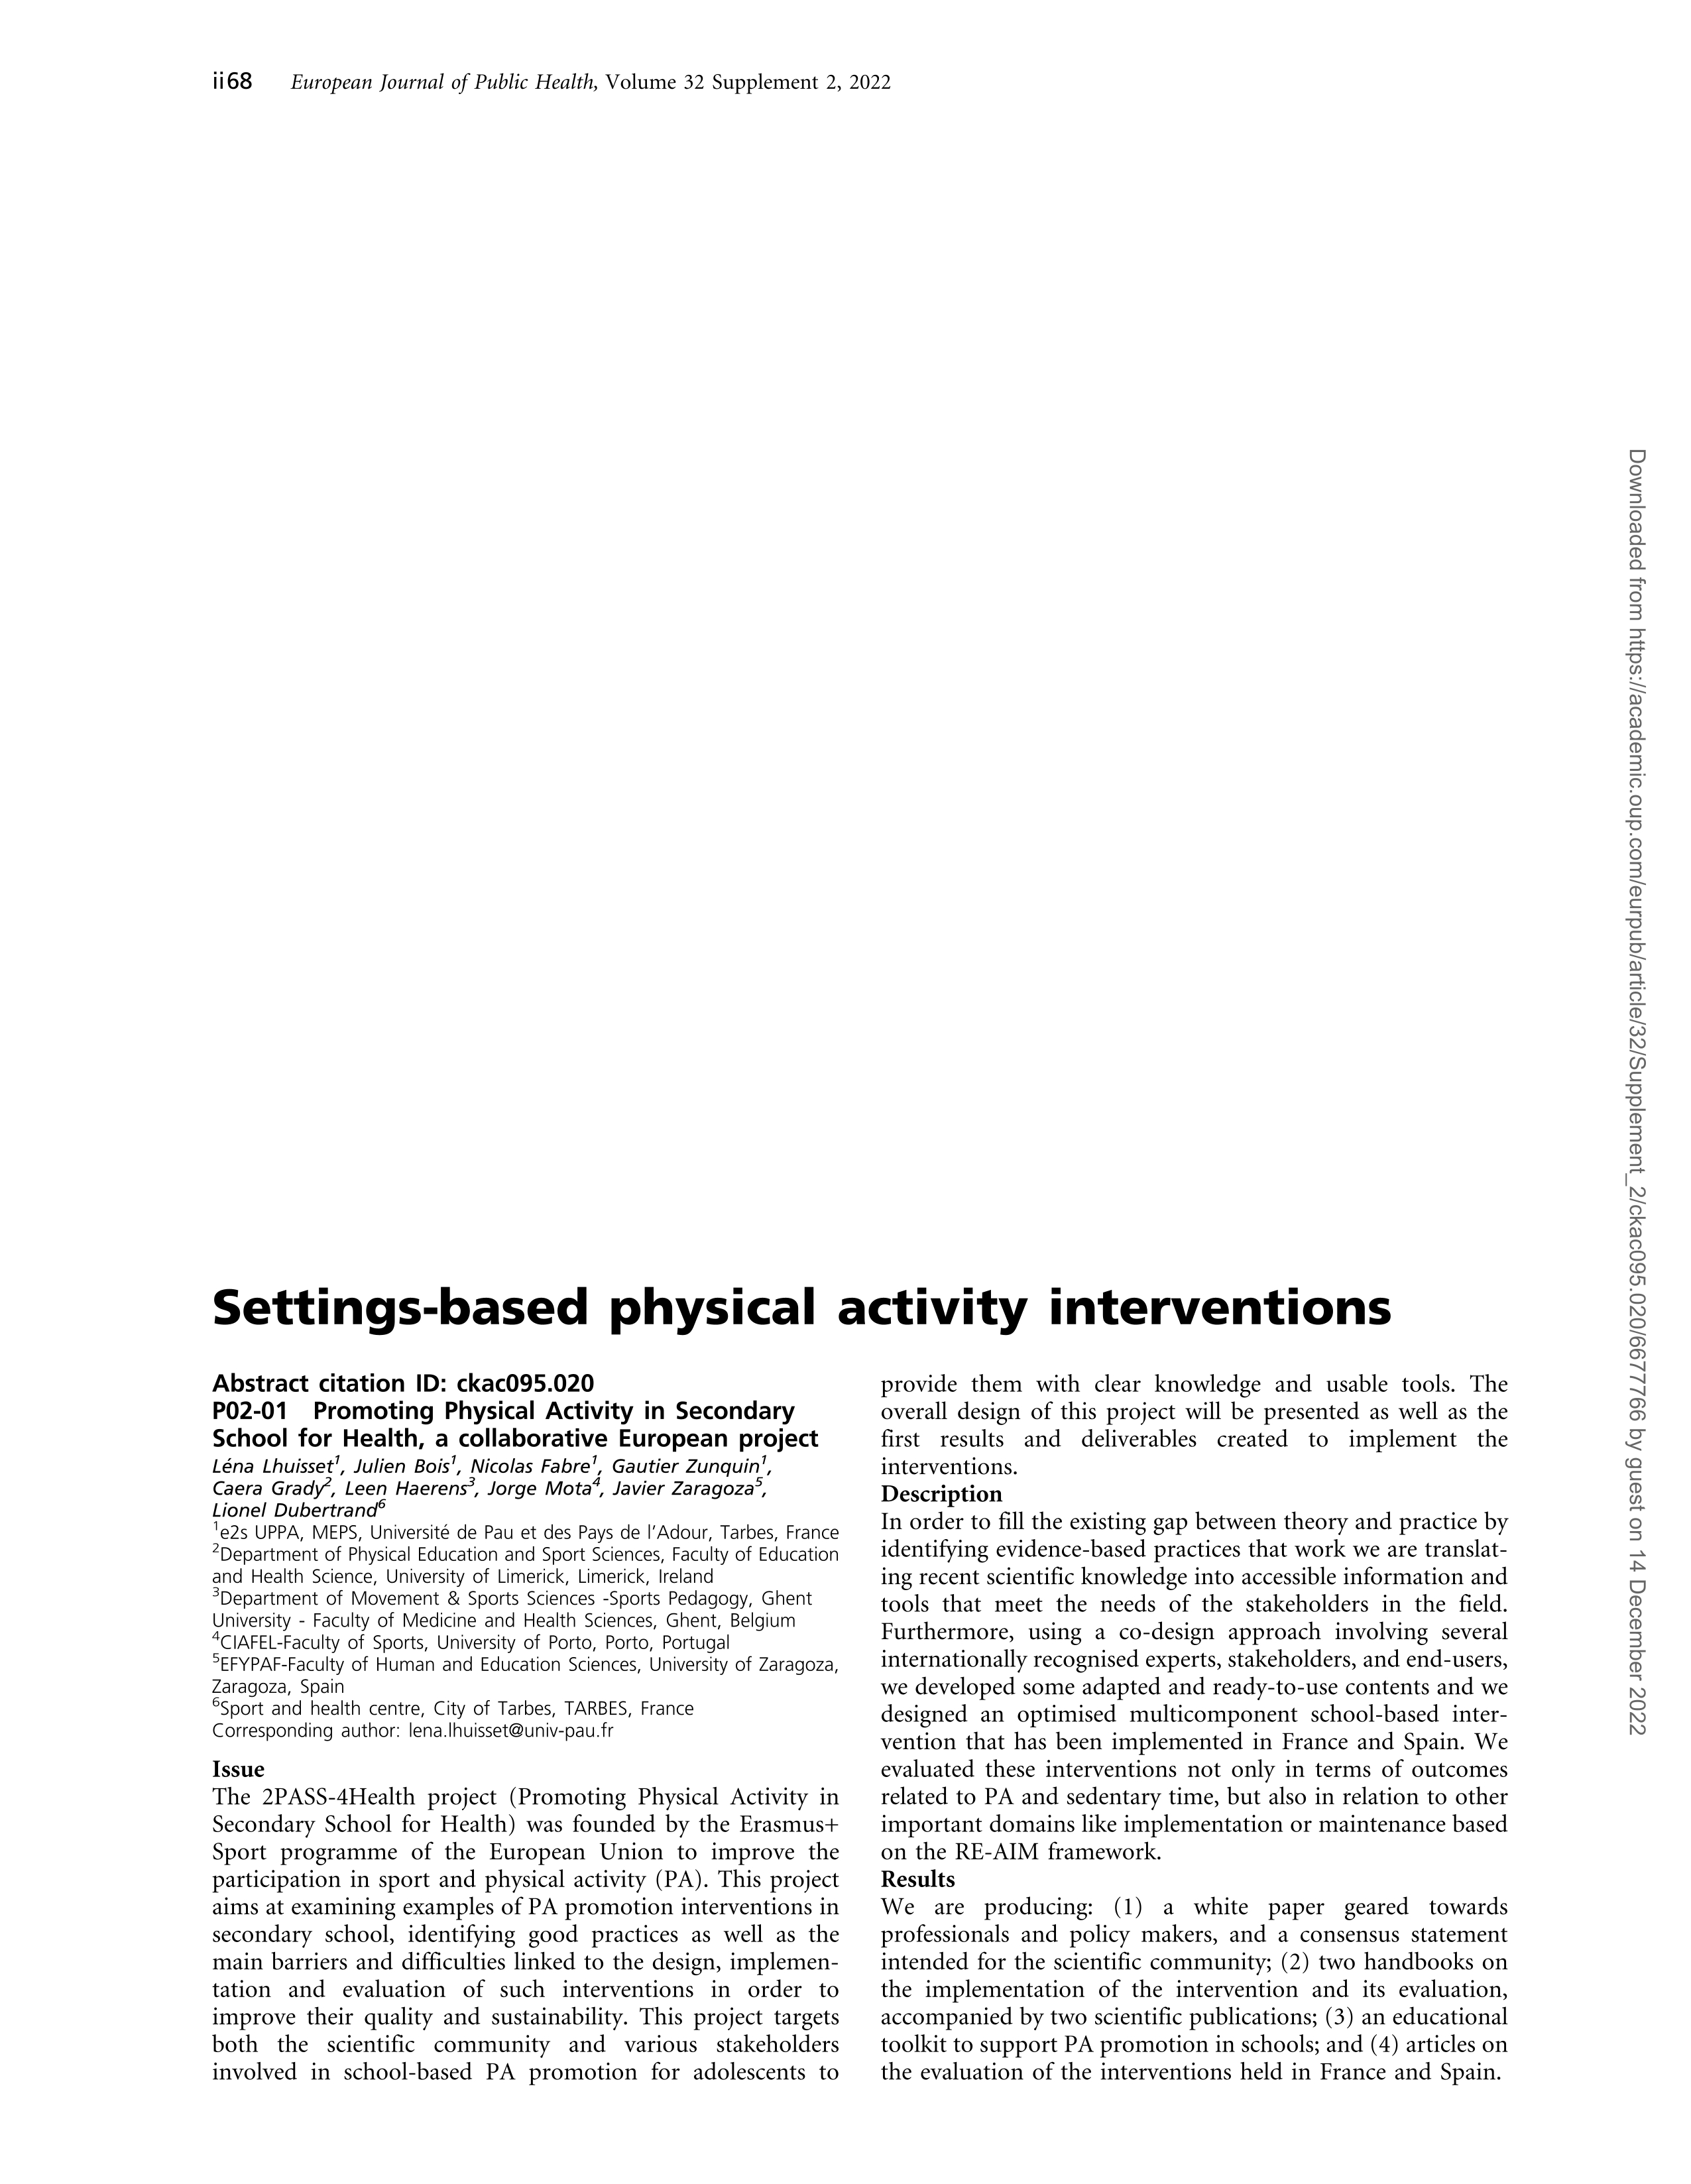 P02-01 Promoting Physical Activity in Secondary School for Health, a collaborative European project